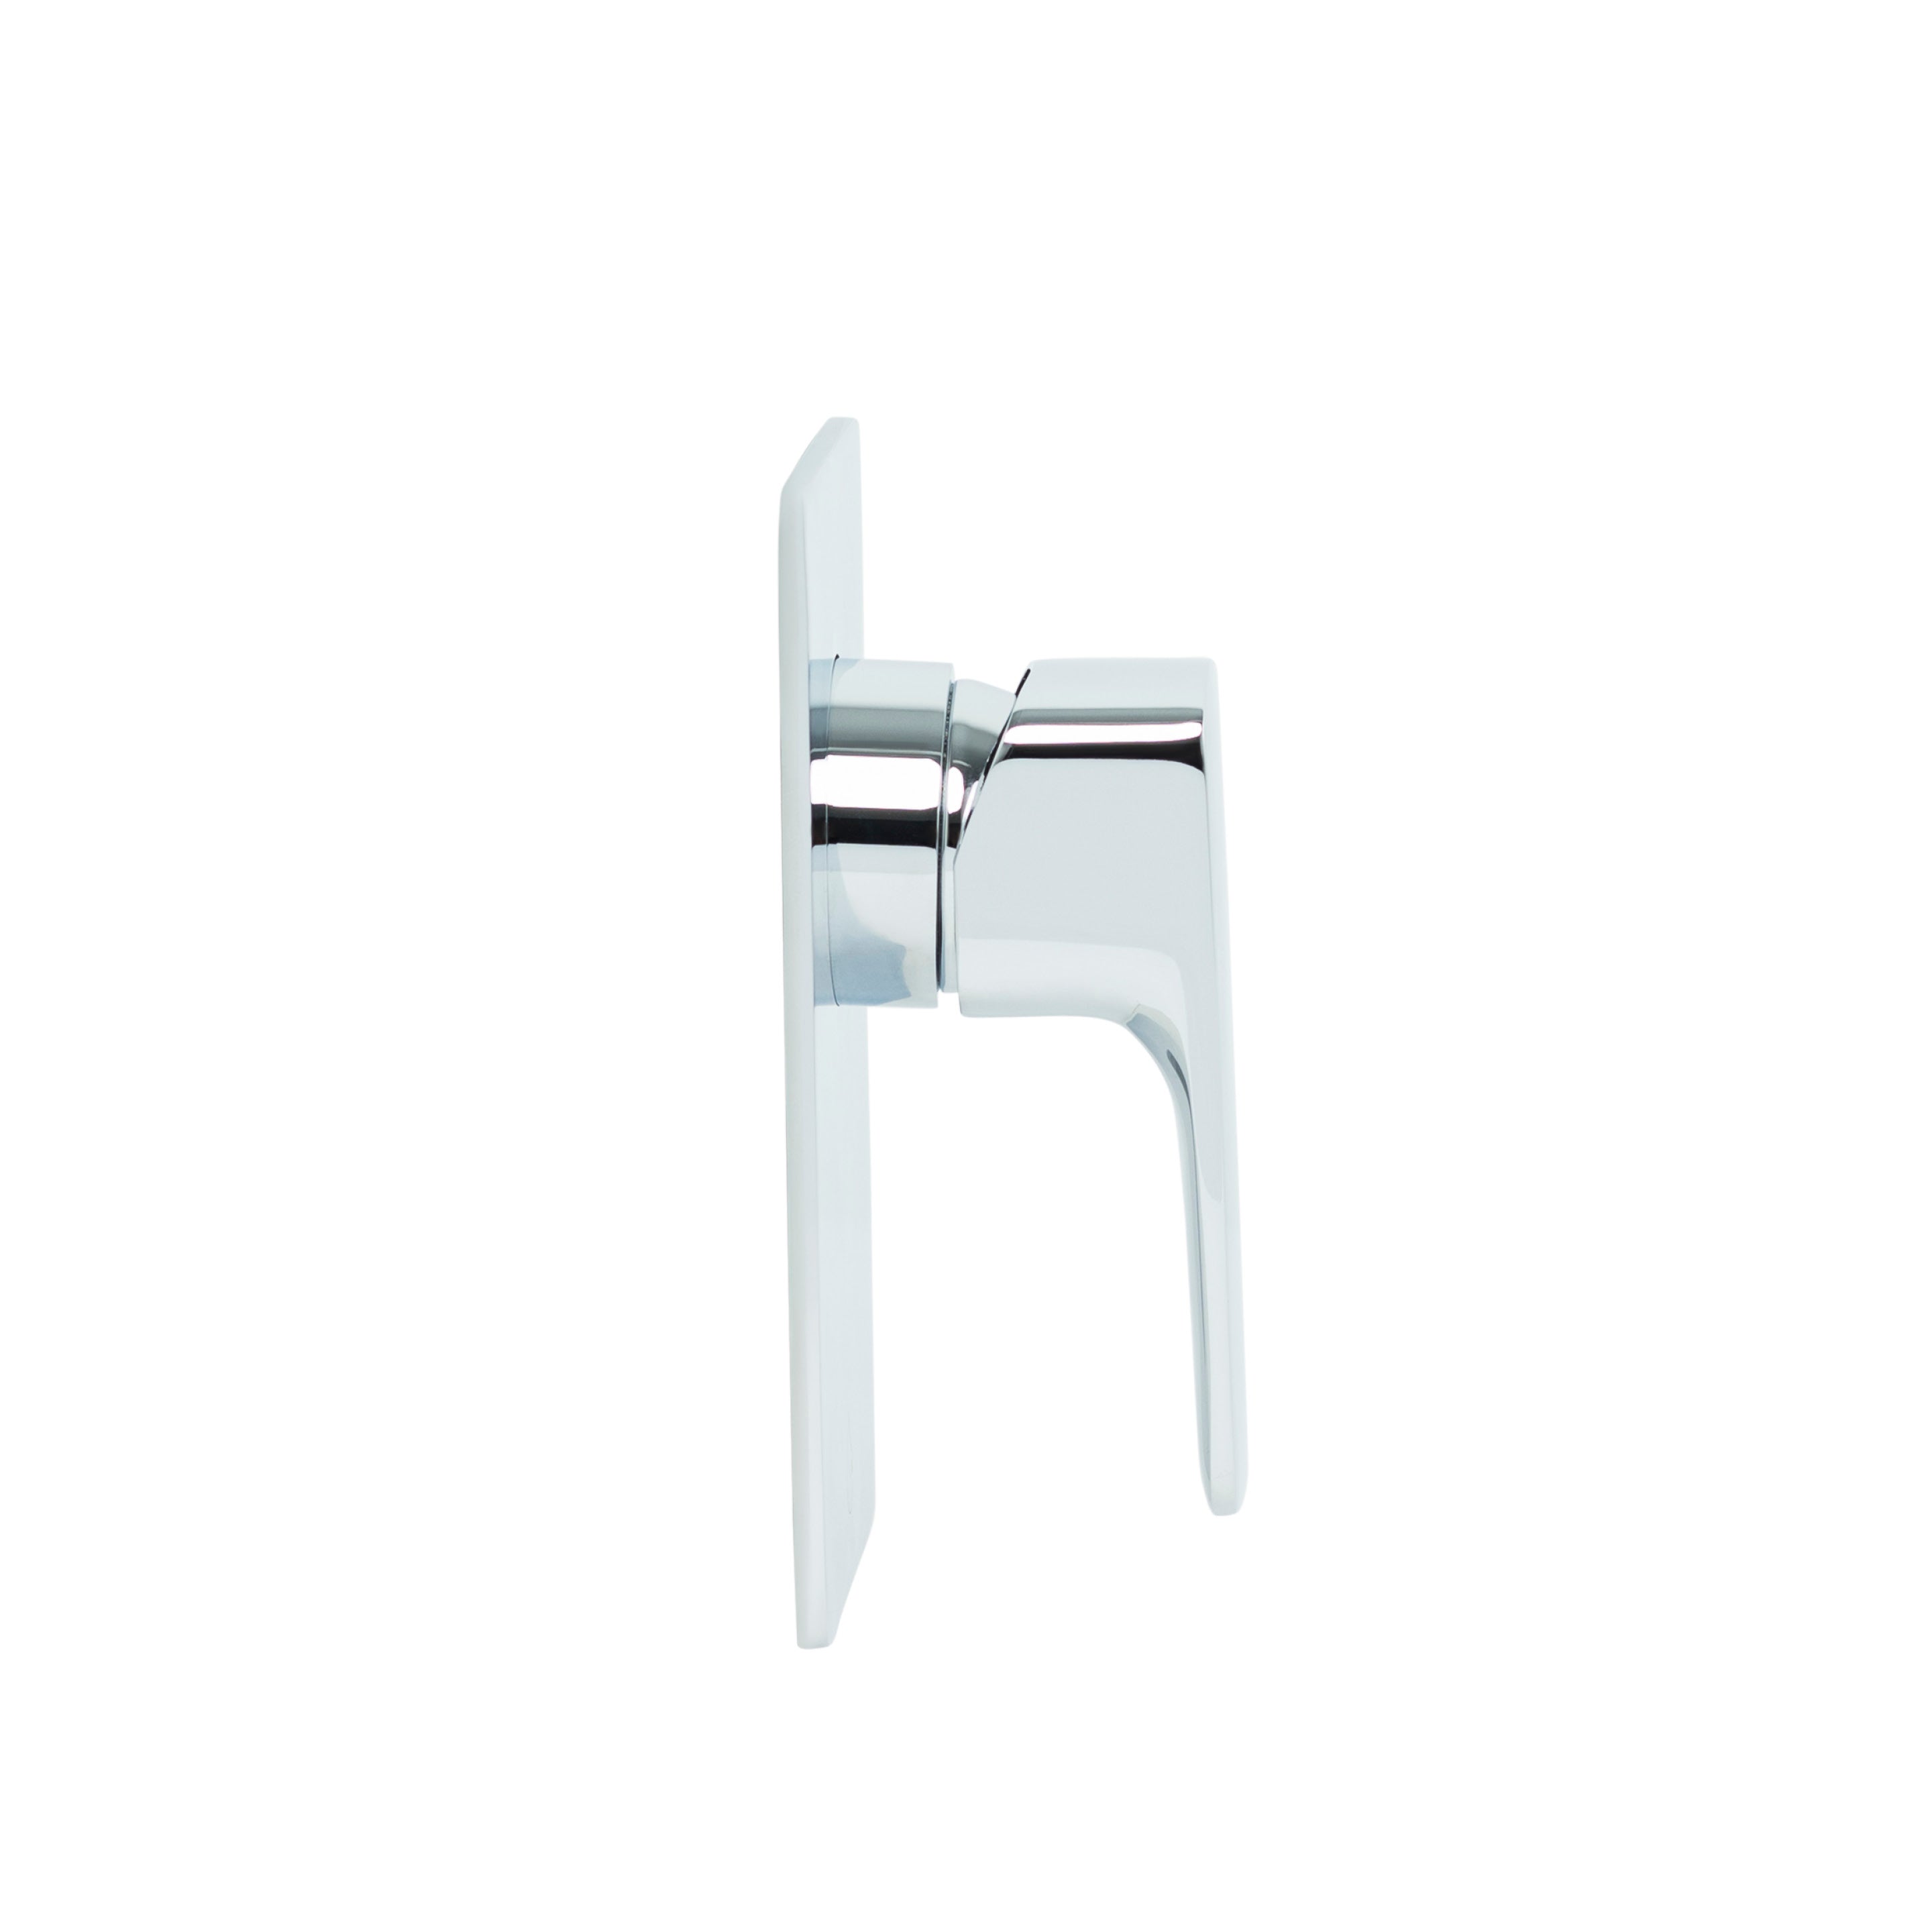 Balmoral Wall Mixer with Rectangular Plate in Chrome